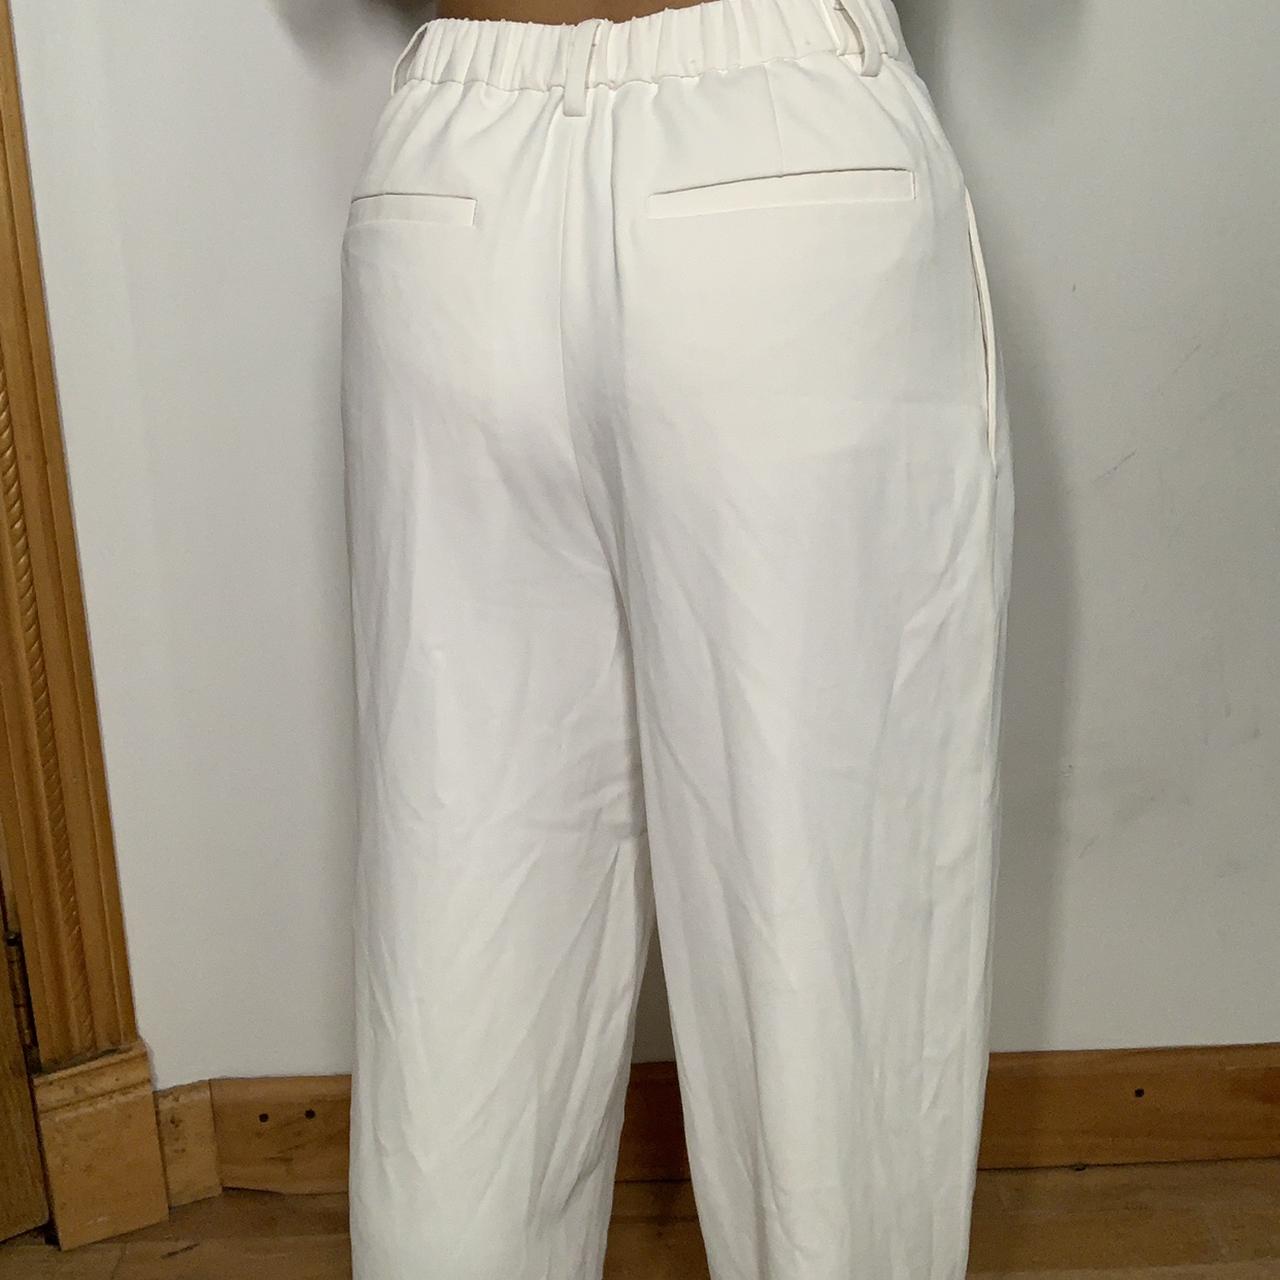 Can someone help me with sizing if I'm a male with a size 31 in pants  looking to buy the female wide leg pants regarding which size to go for ?  XL ? :